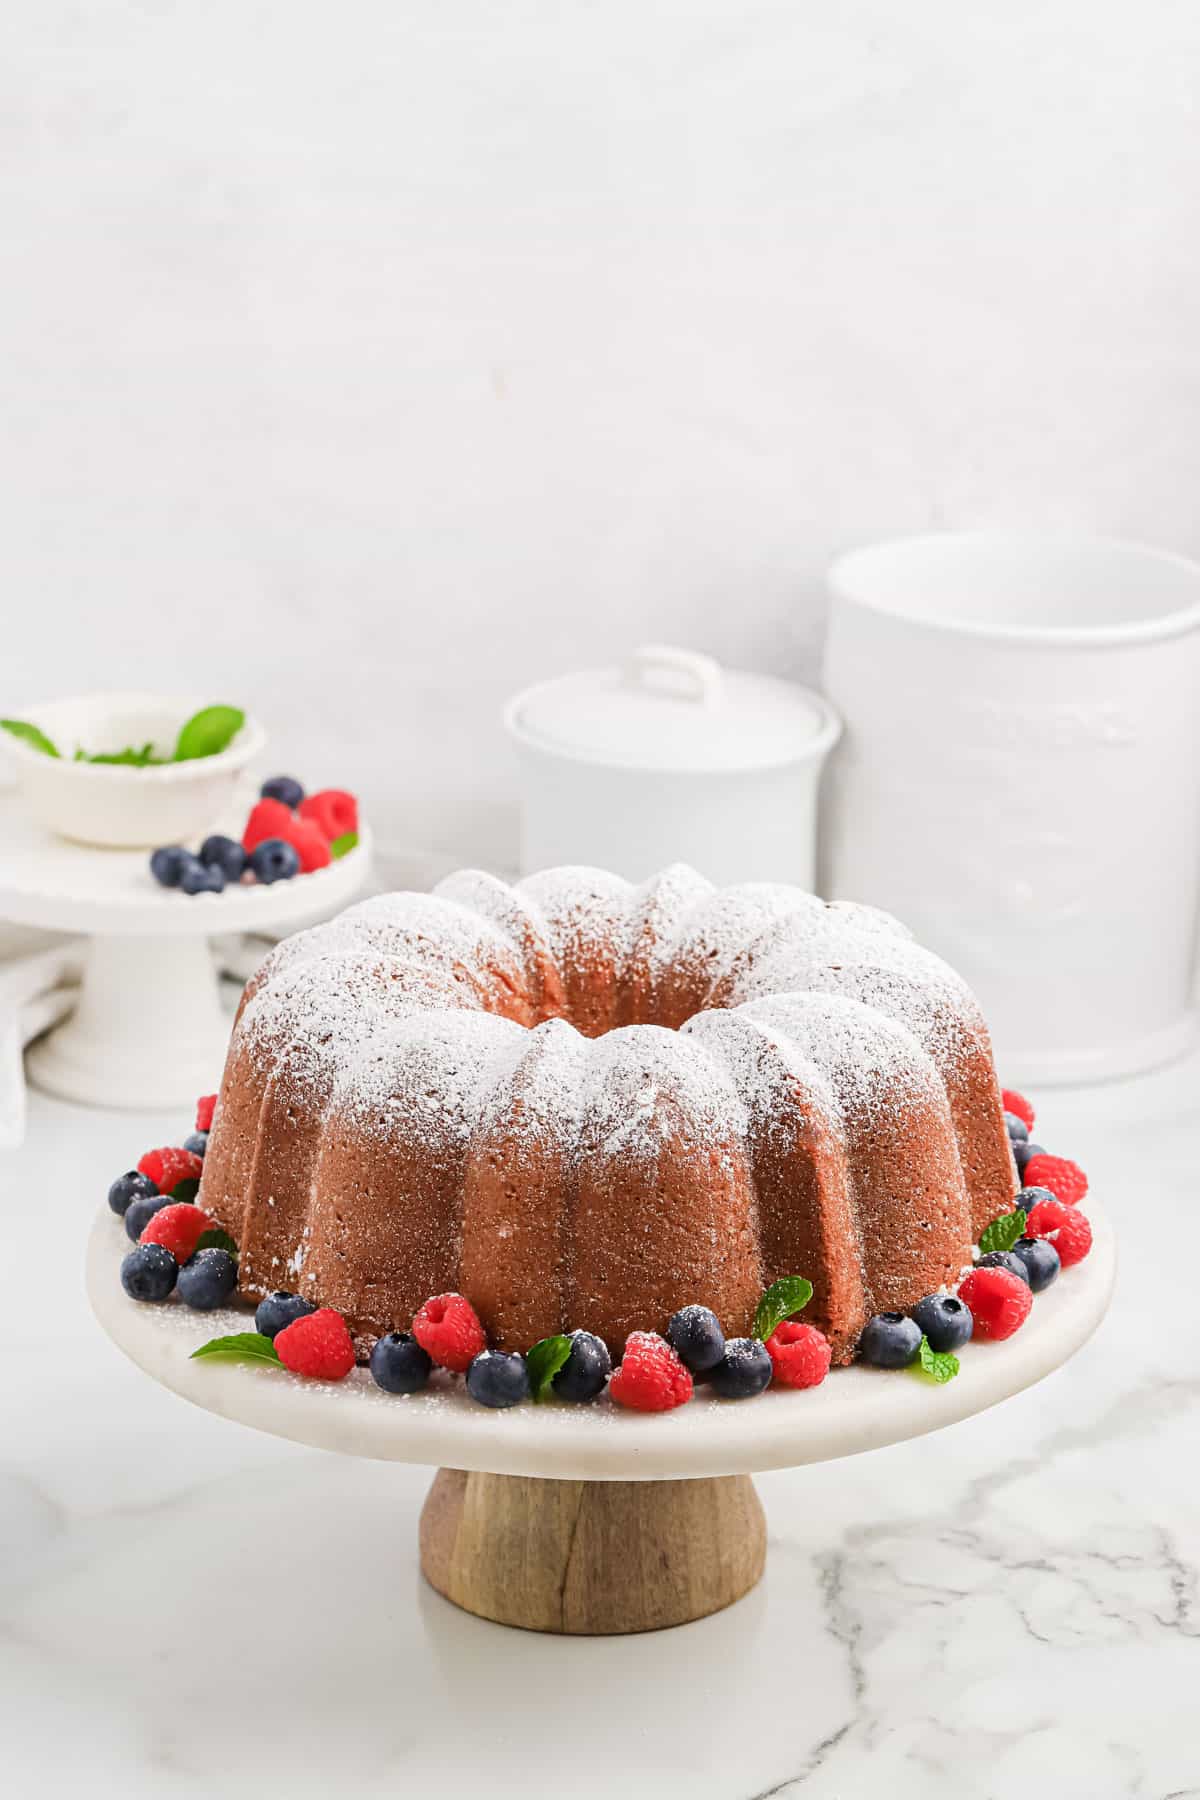 Cream cheese pound cake on a white cake stand with berries.